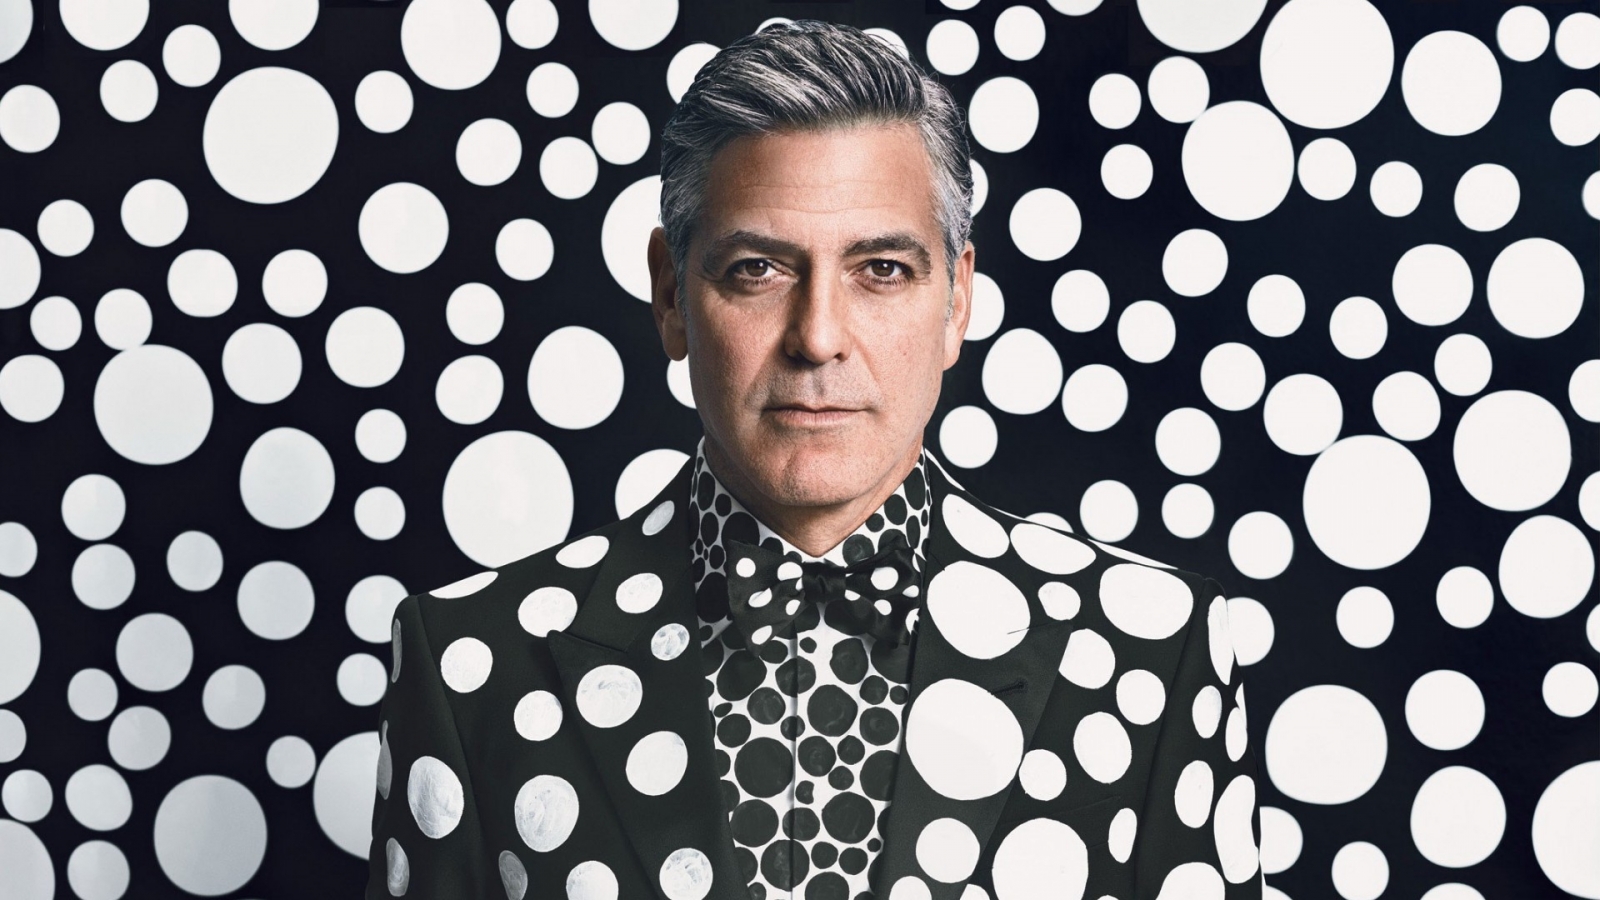 George Clooney Portrait for 1600 x 900 HDTV resolution